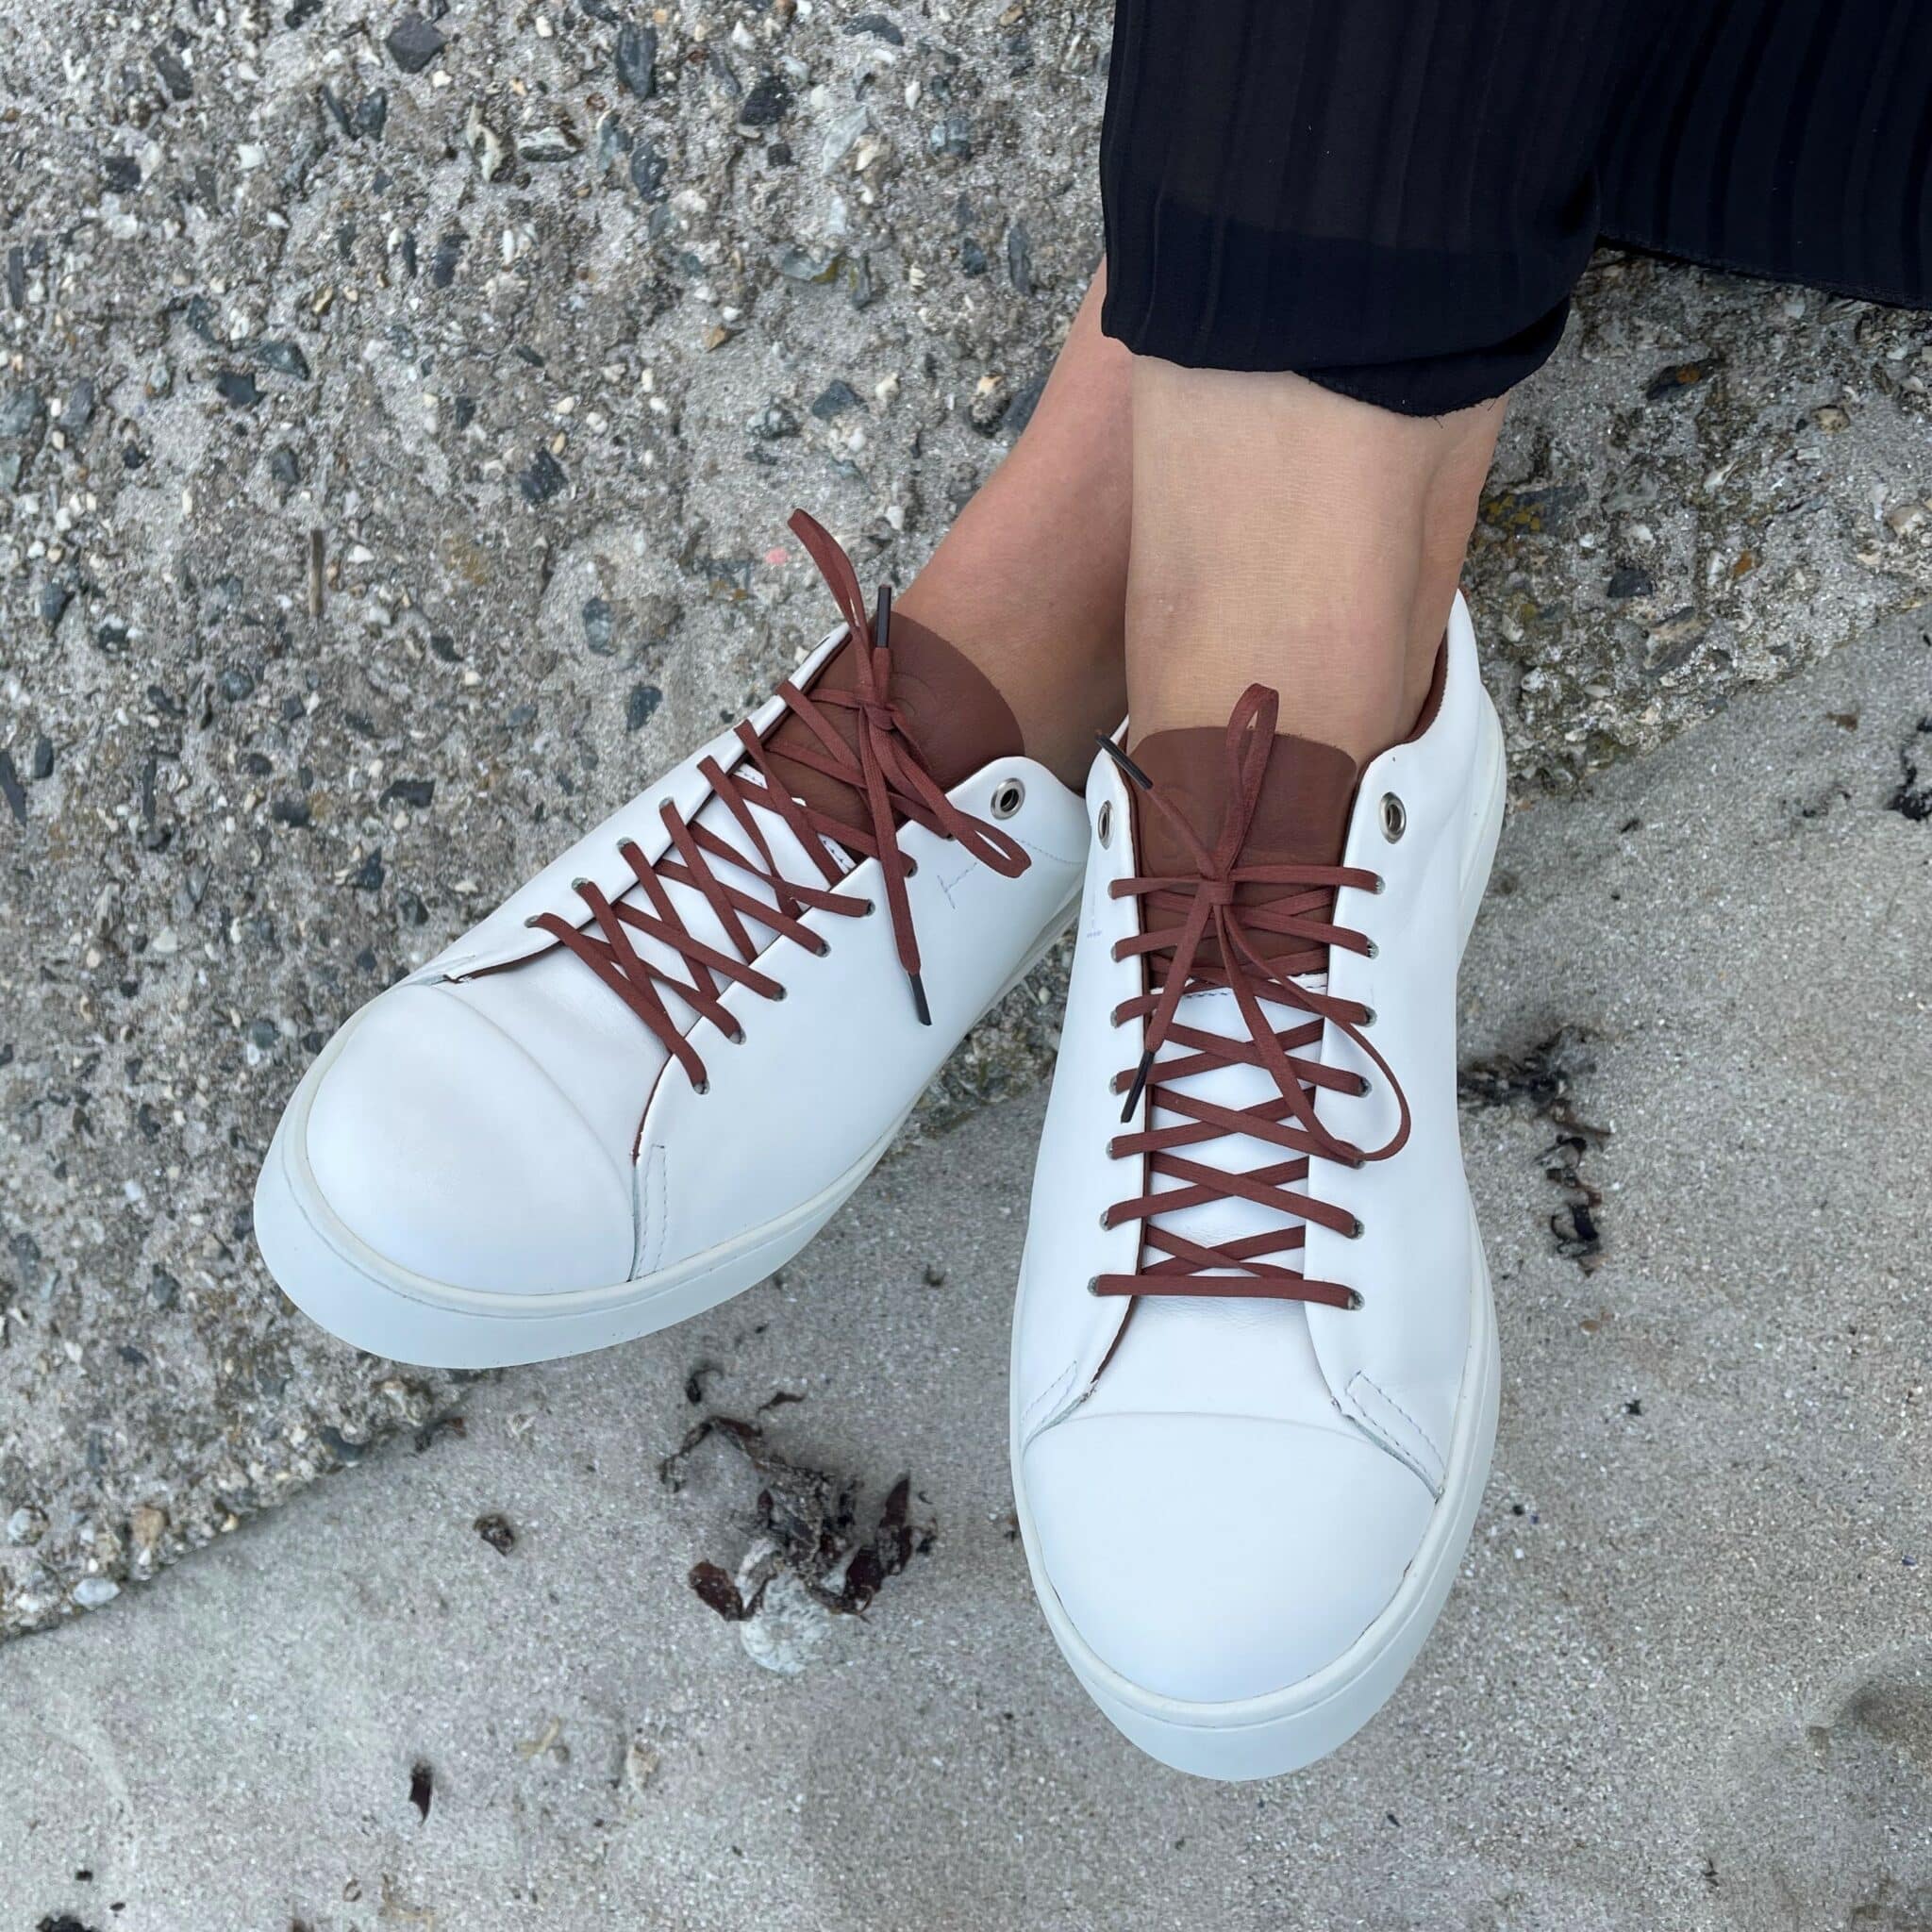 Made in Italy Chaussures \u00e0 lacets gris clair mouchet\u00e9 style d\u00e9contract\u00e9 Chaussures Chaussures basses Chaussures à lacets 